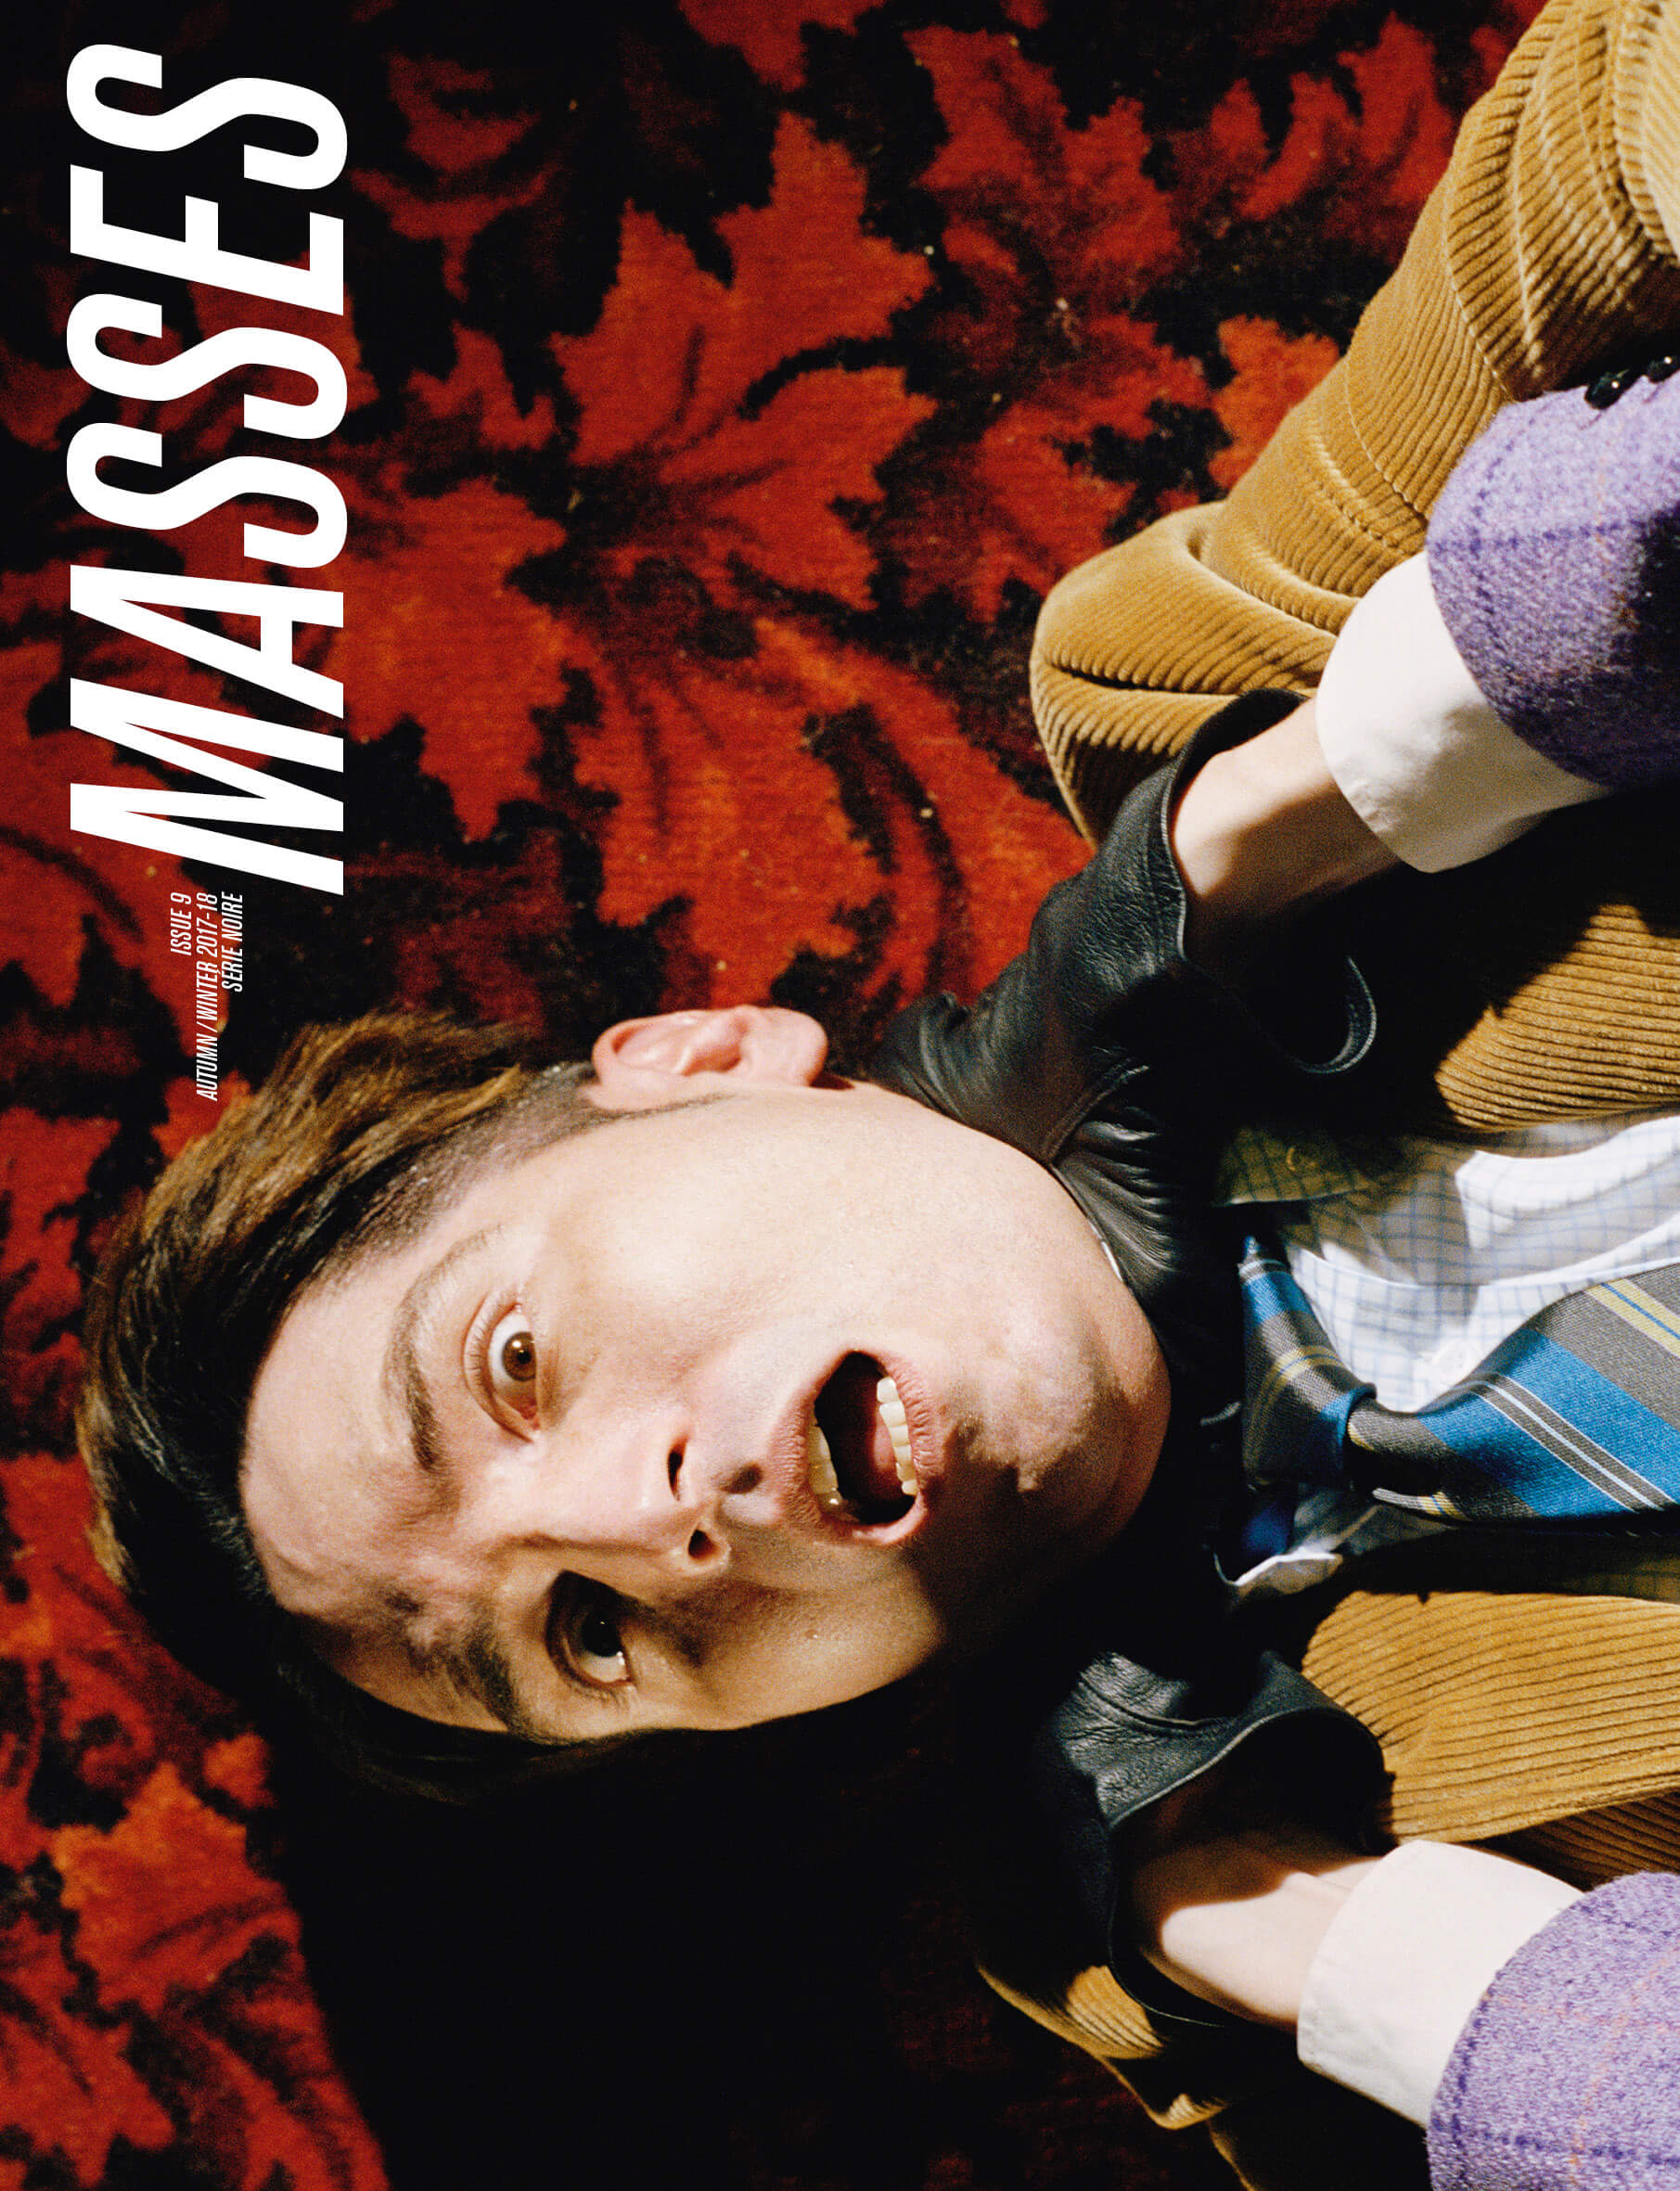 MASSES Magazine Issue No. 9 – Cover photographed by CG Watkins and Eric Diulein & Sacha Quintin with David Dastmalchian wearing Prada and Raf Simons